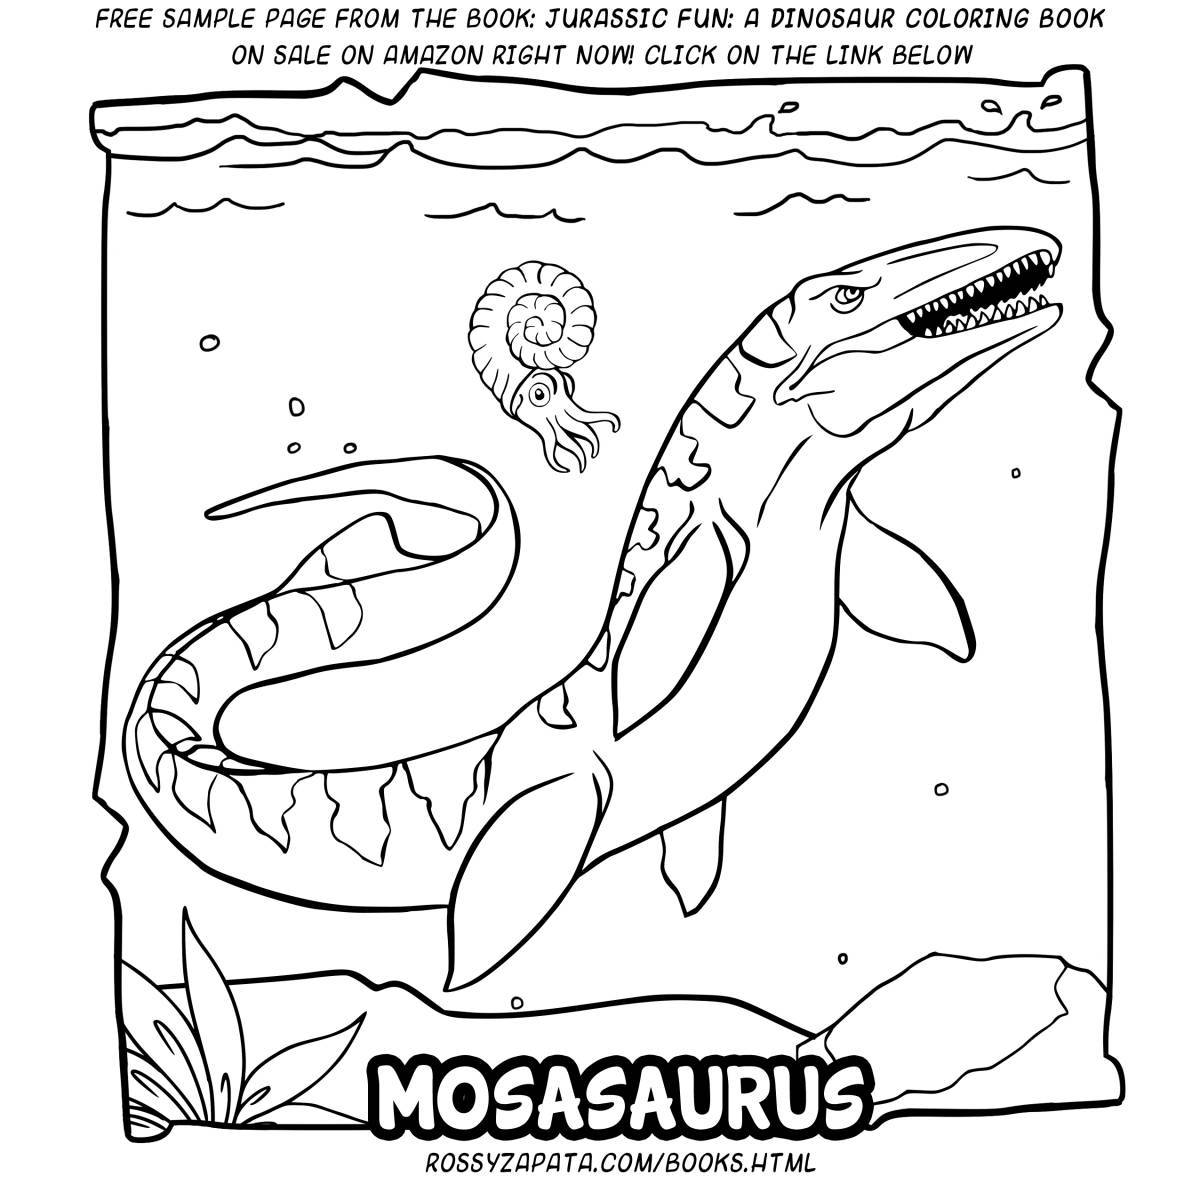 Outstanding mosasaurus coloring